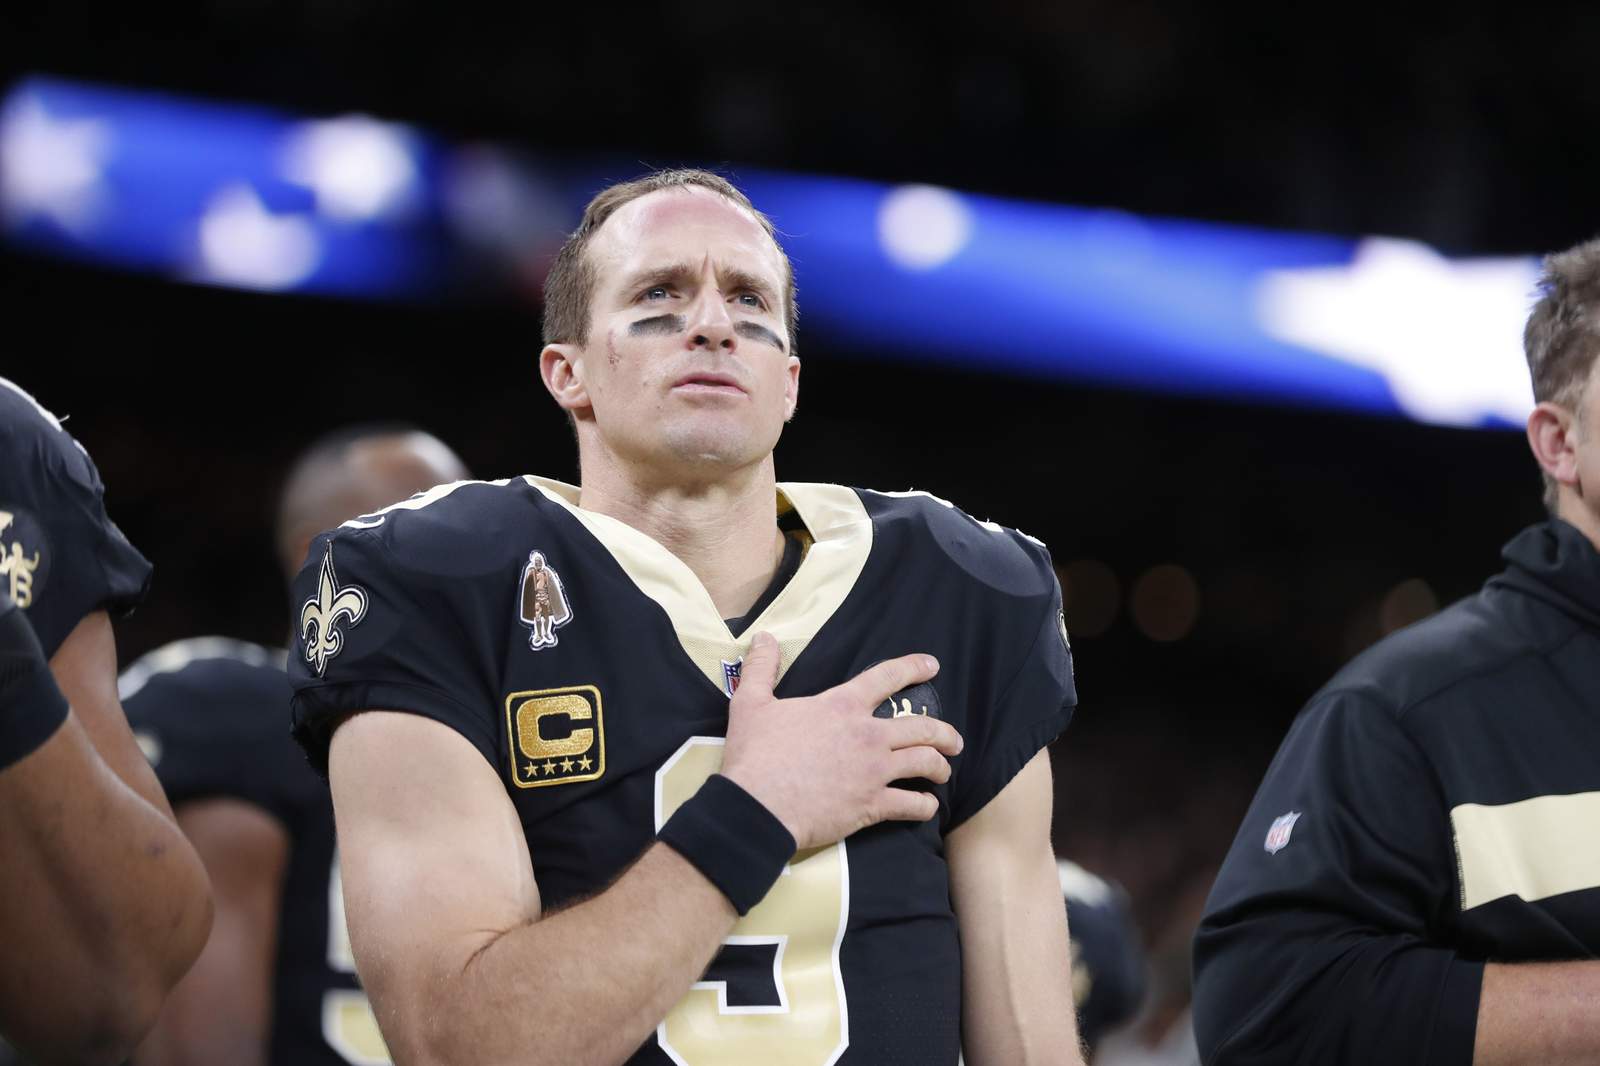 Brees will stand for anthem, but respects those who kneel